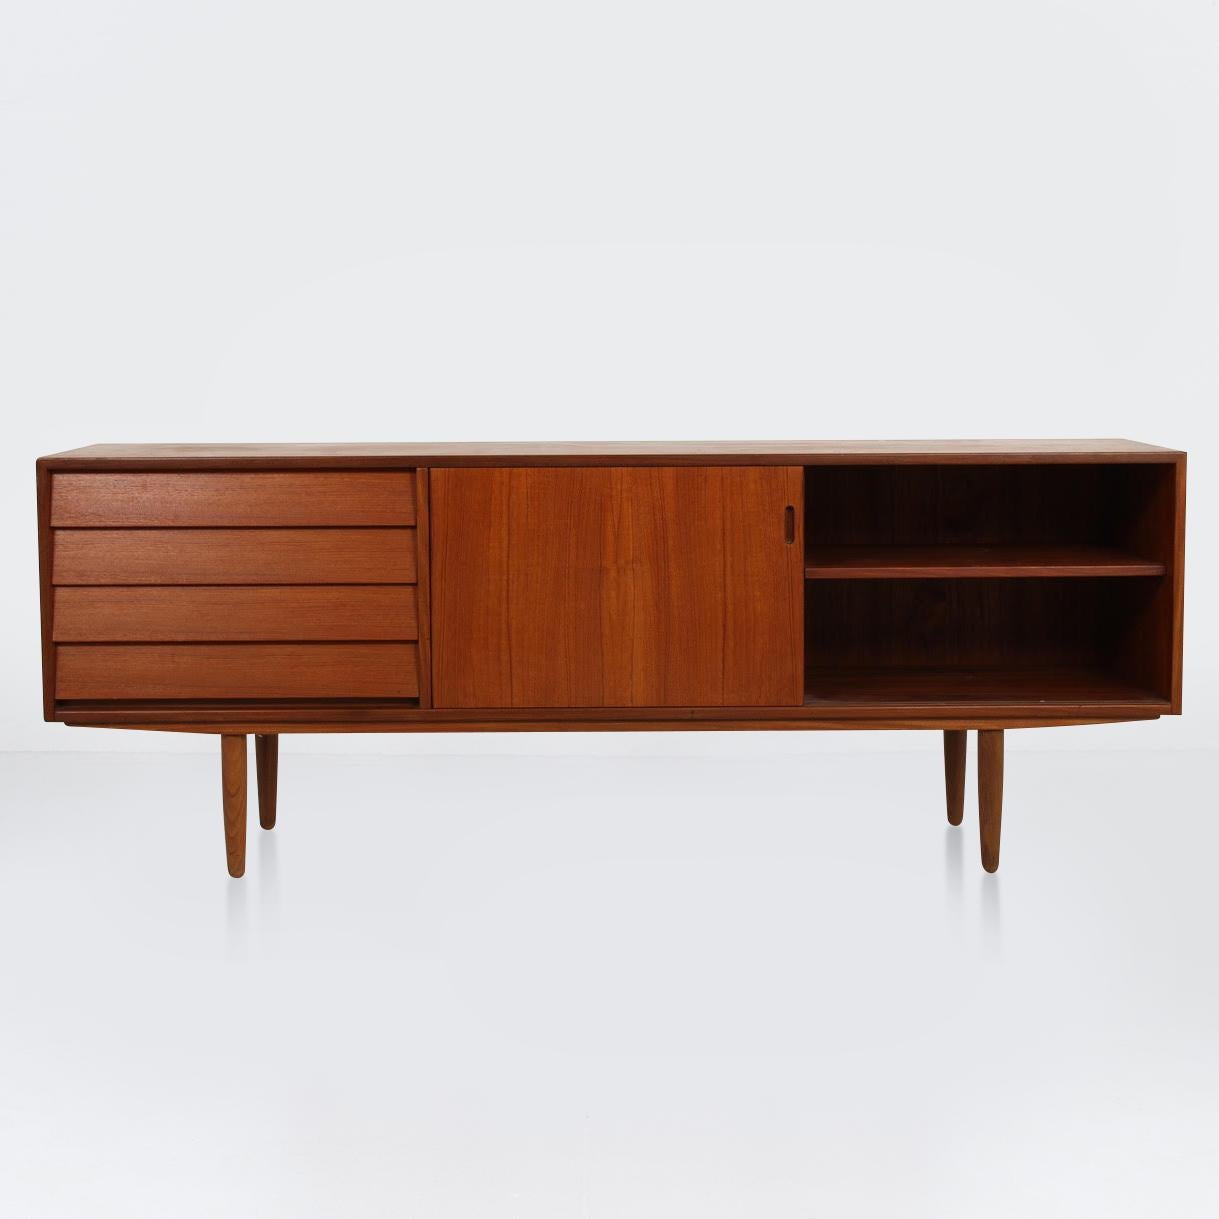 Low-line richly grained teak veneer sideboard

This cabinet has a uniquely designed bank of four drawers and sliding doors which open to reveal fixed shelved storage space

Designed and produced in Denmark in the 1960s
